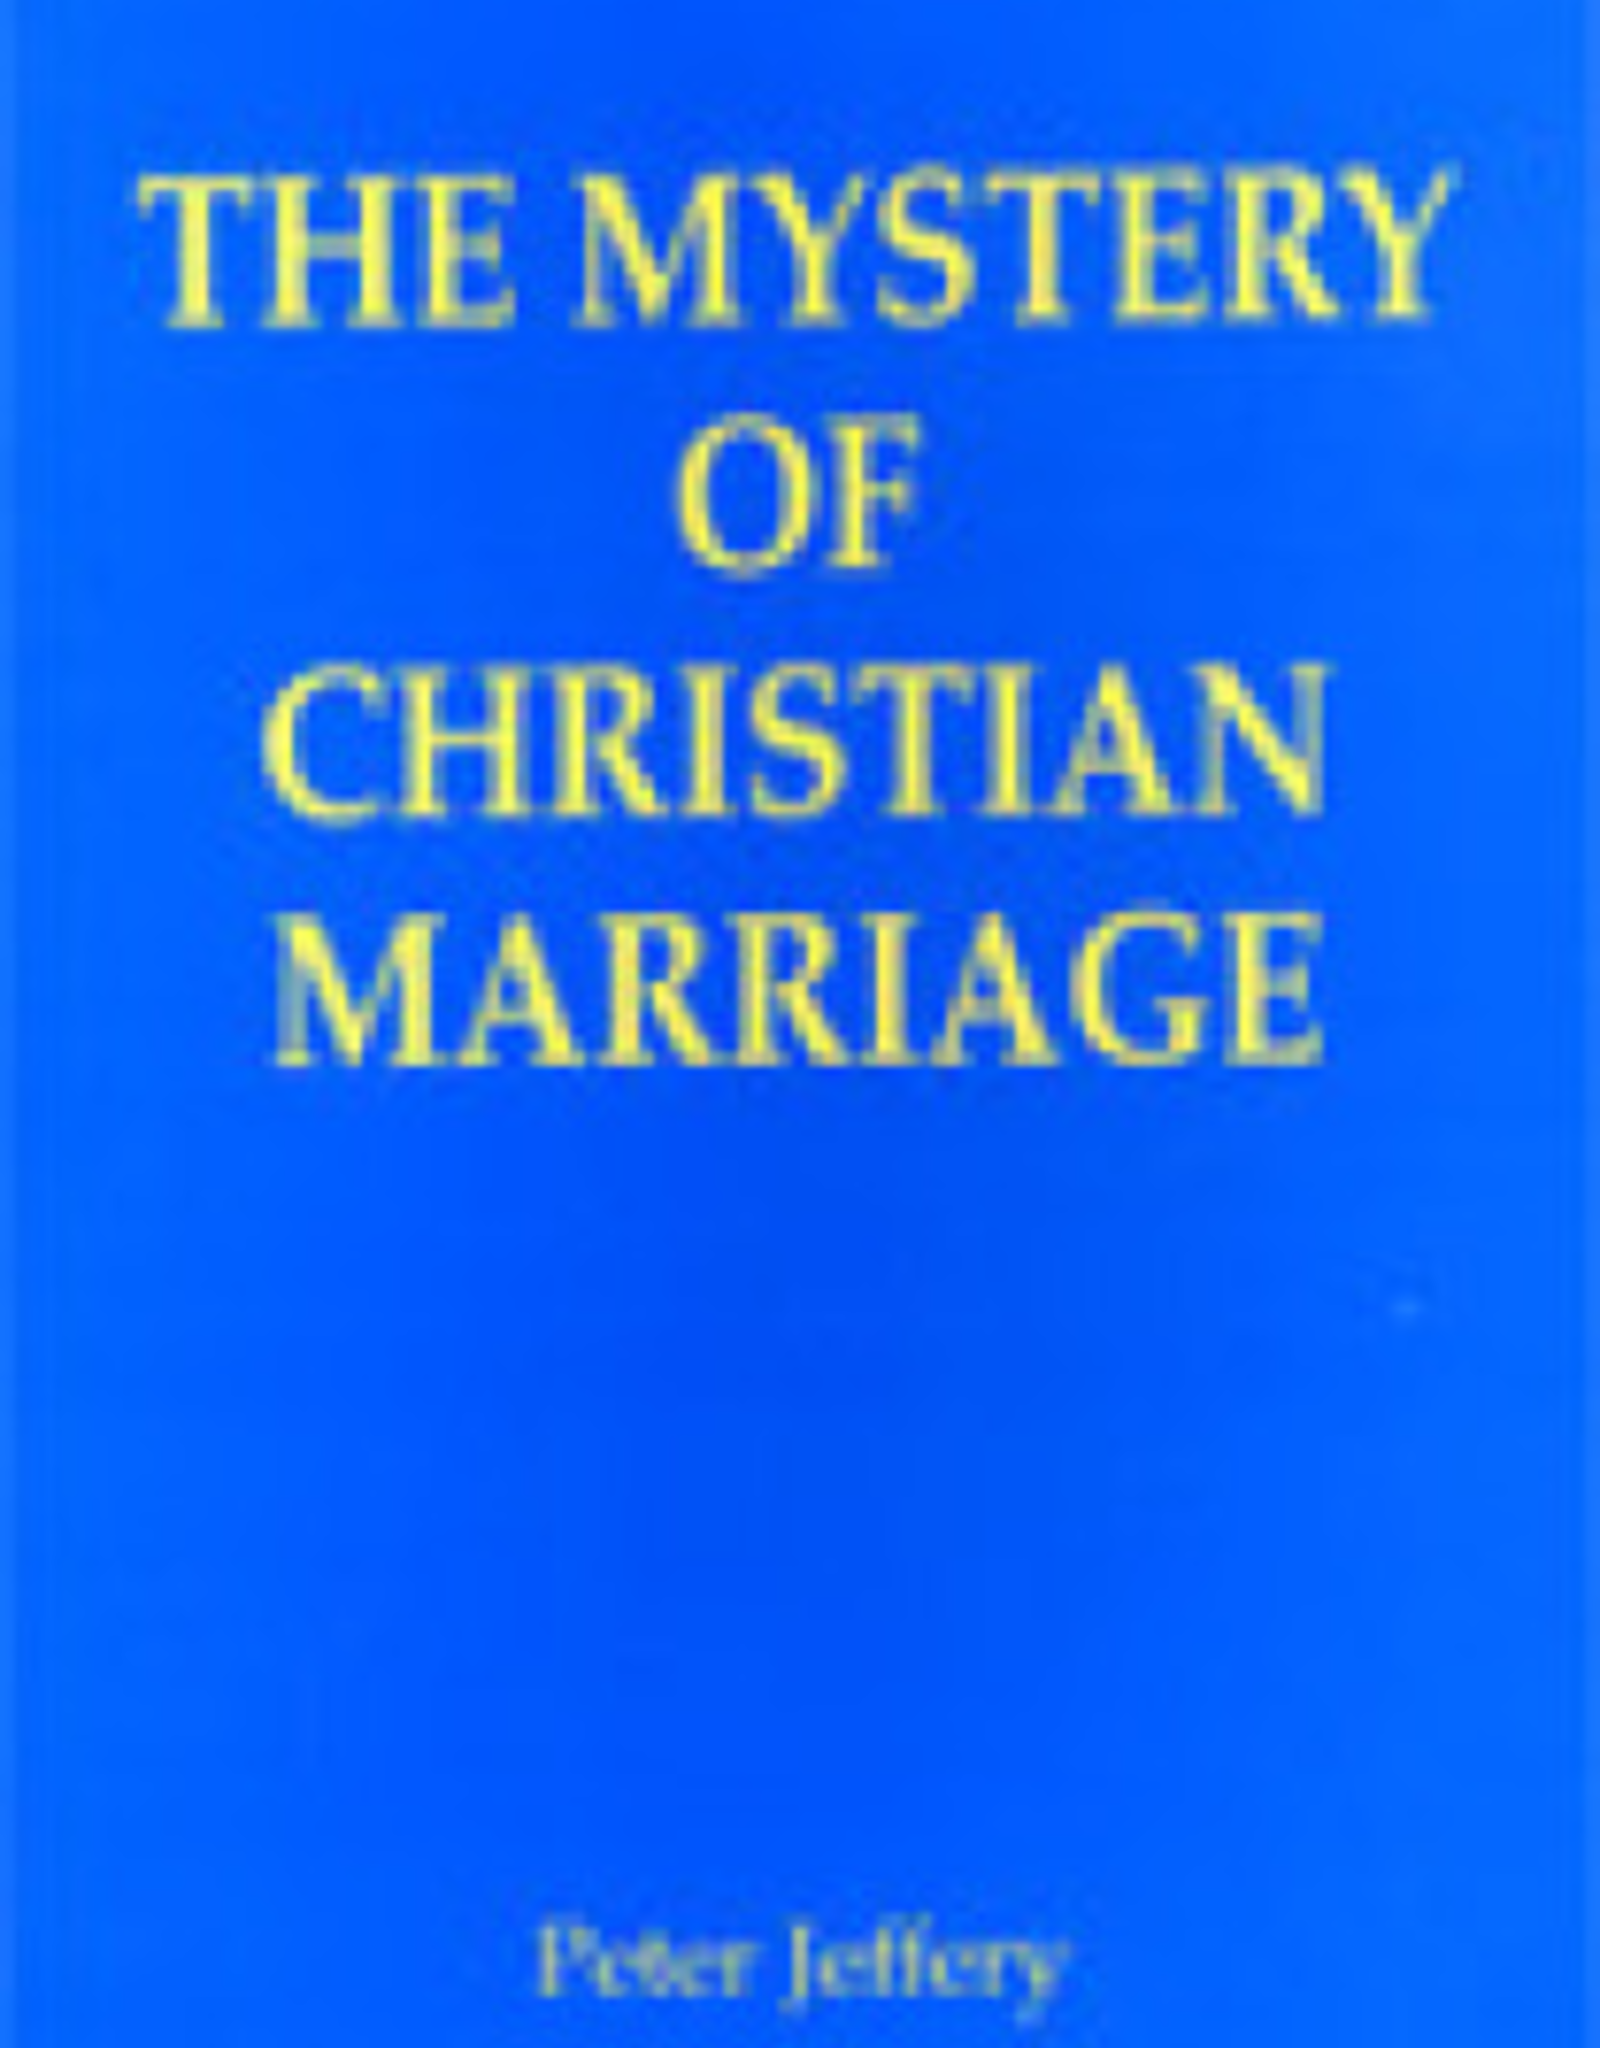 Paulist Press The Mystery of Christian Marriage, by Peter Jeffrey, CSSp (paperback)